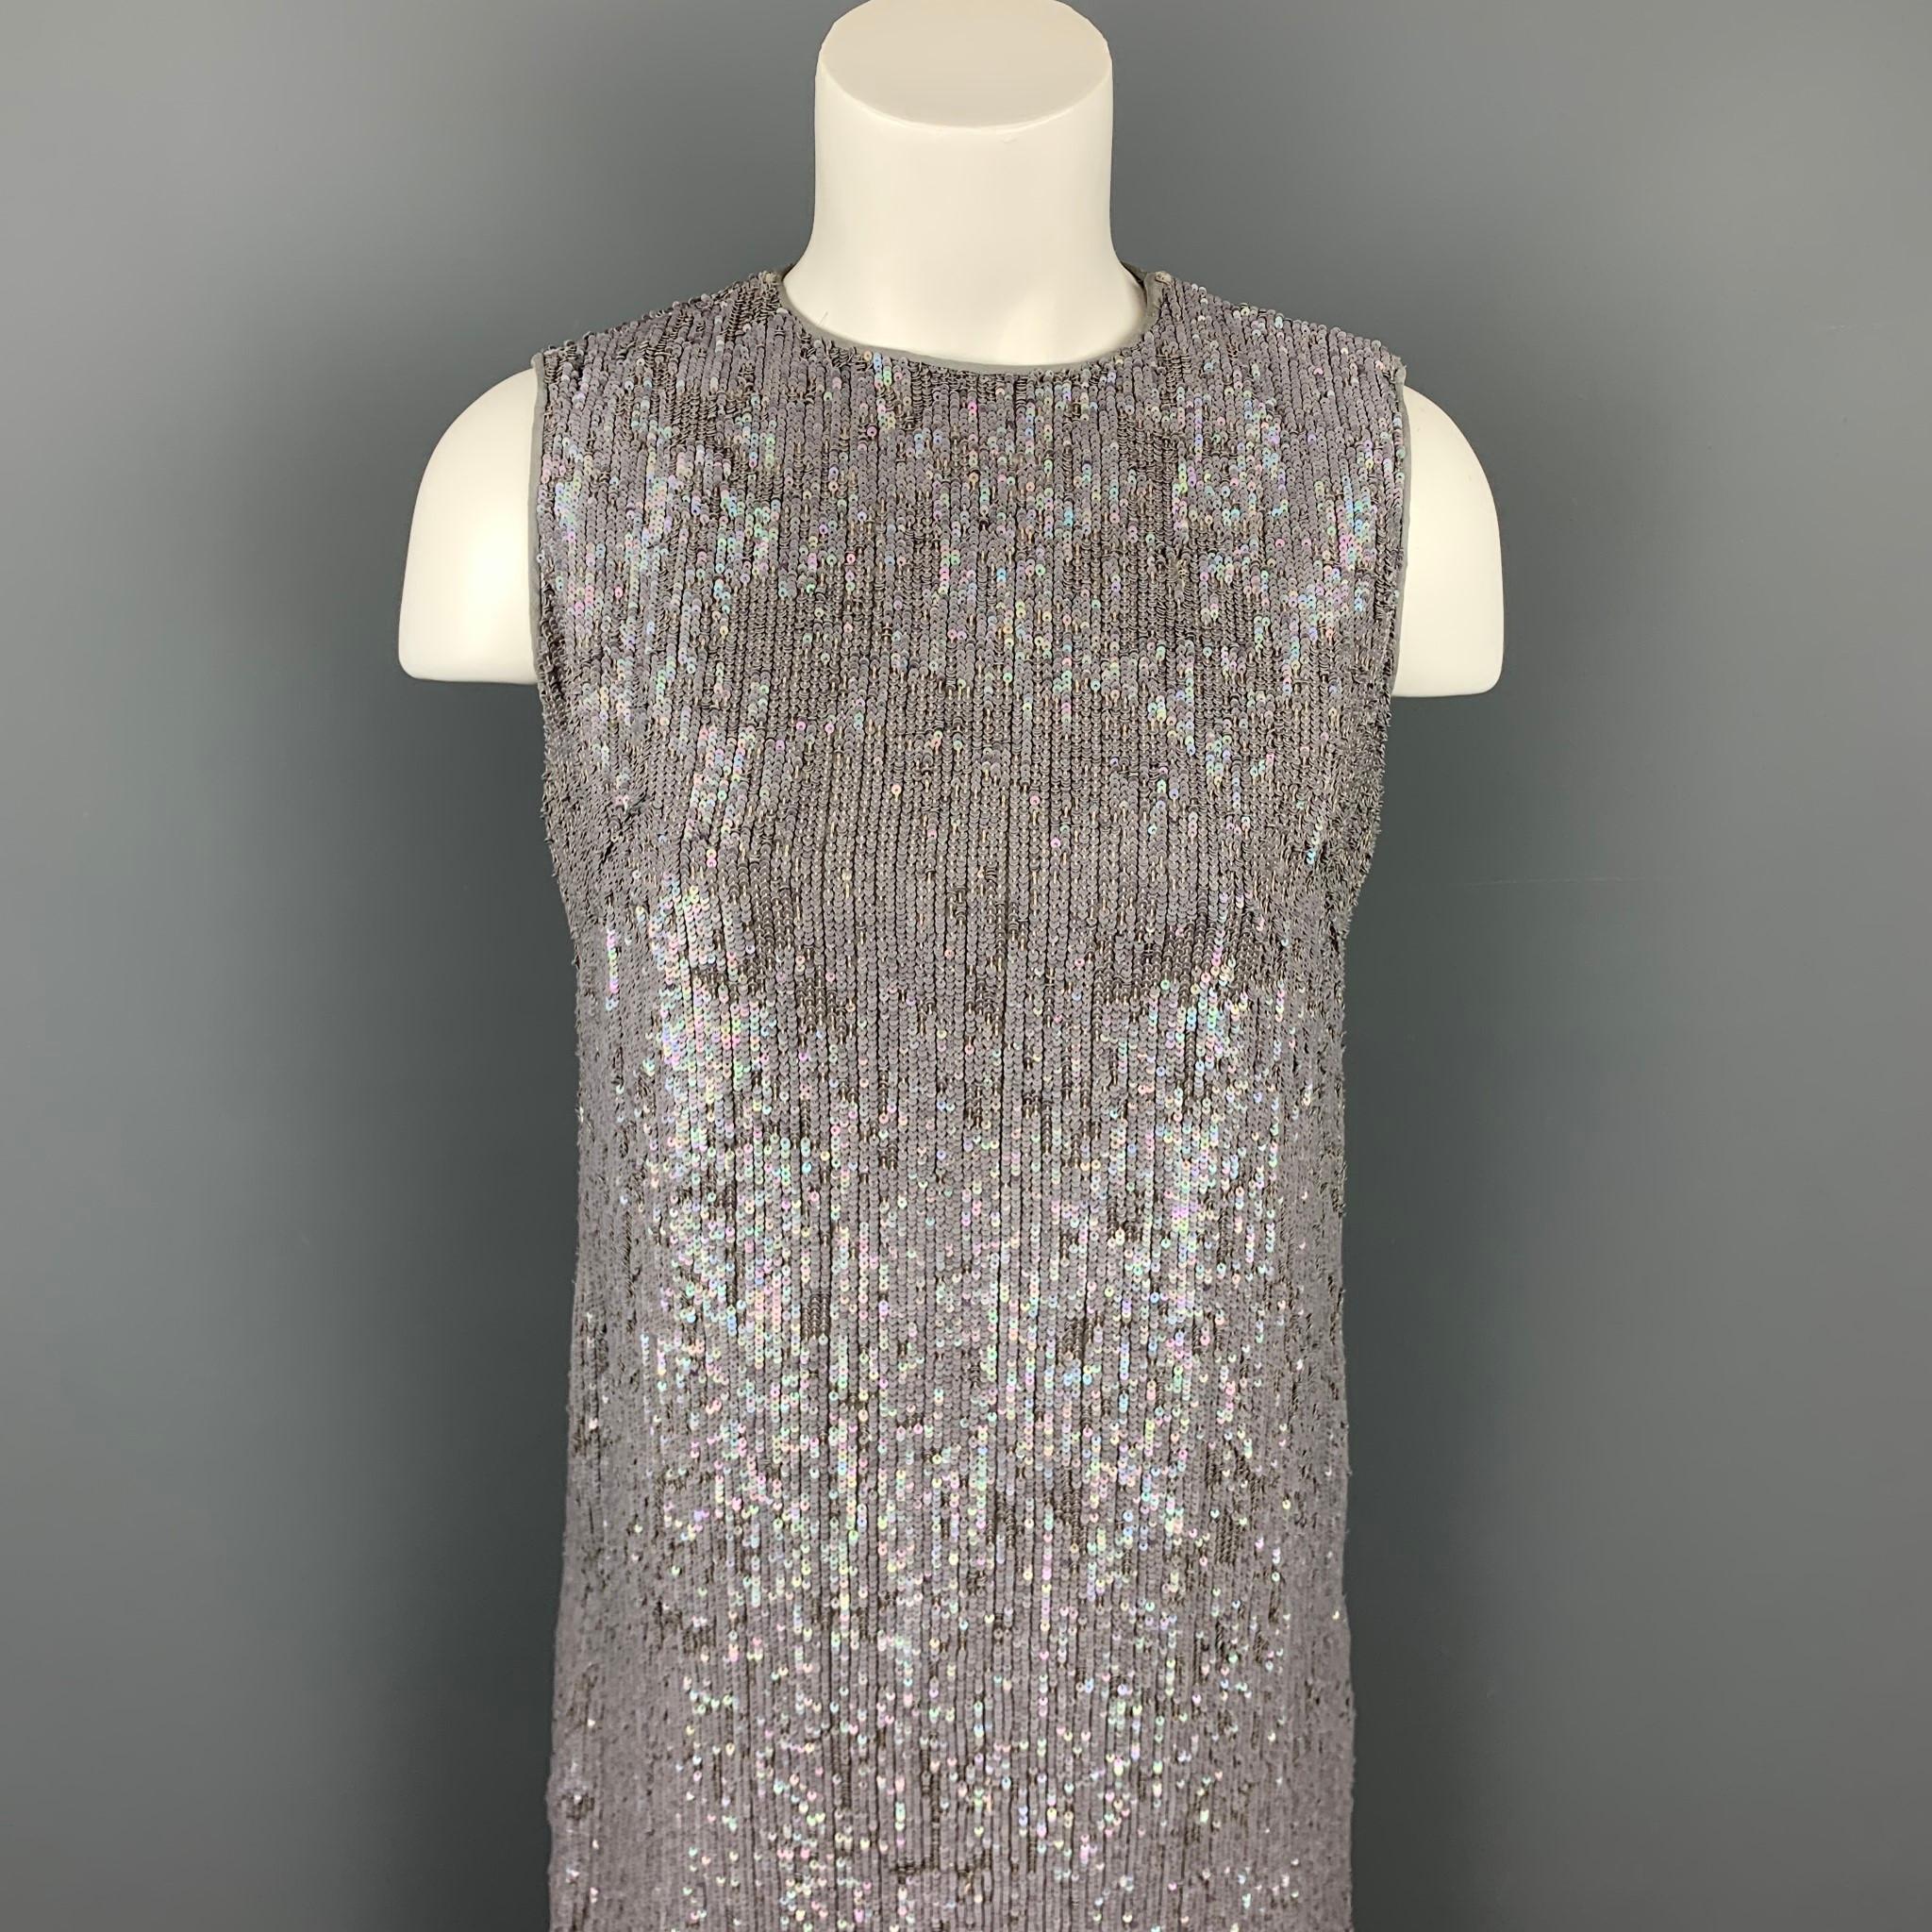 NORMAN AMBROSE cocktail dress in a slate silk with a iridescent sequin design featuring a shift style, hemmed mink fur panel, back button, and a shoulder hook & eye closure.

Very Good Pre-Owned Condition.
Marked: 4

Measurements:

Shoulder: 13